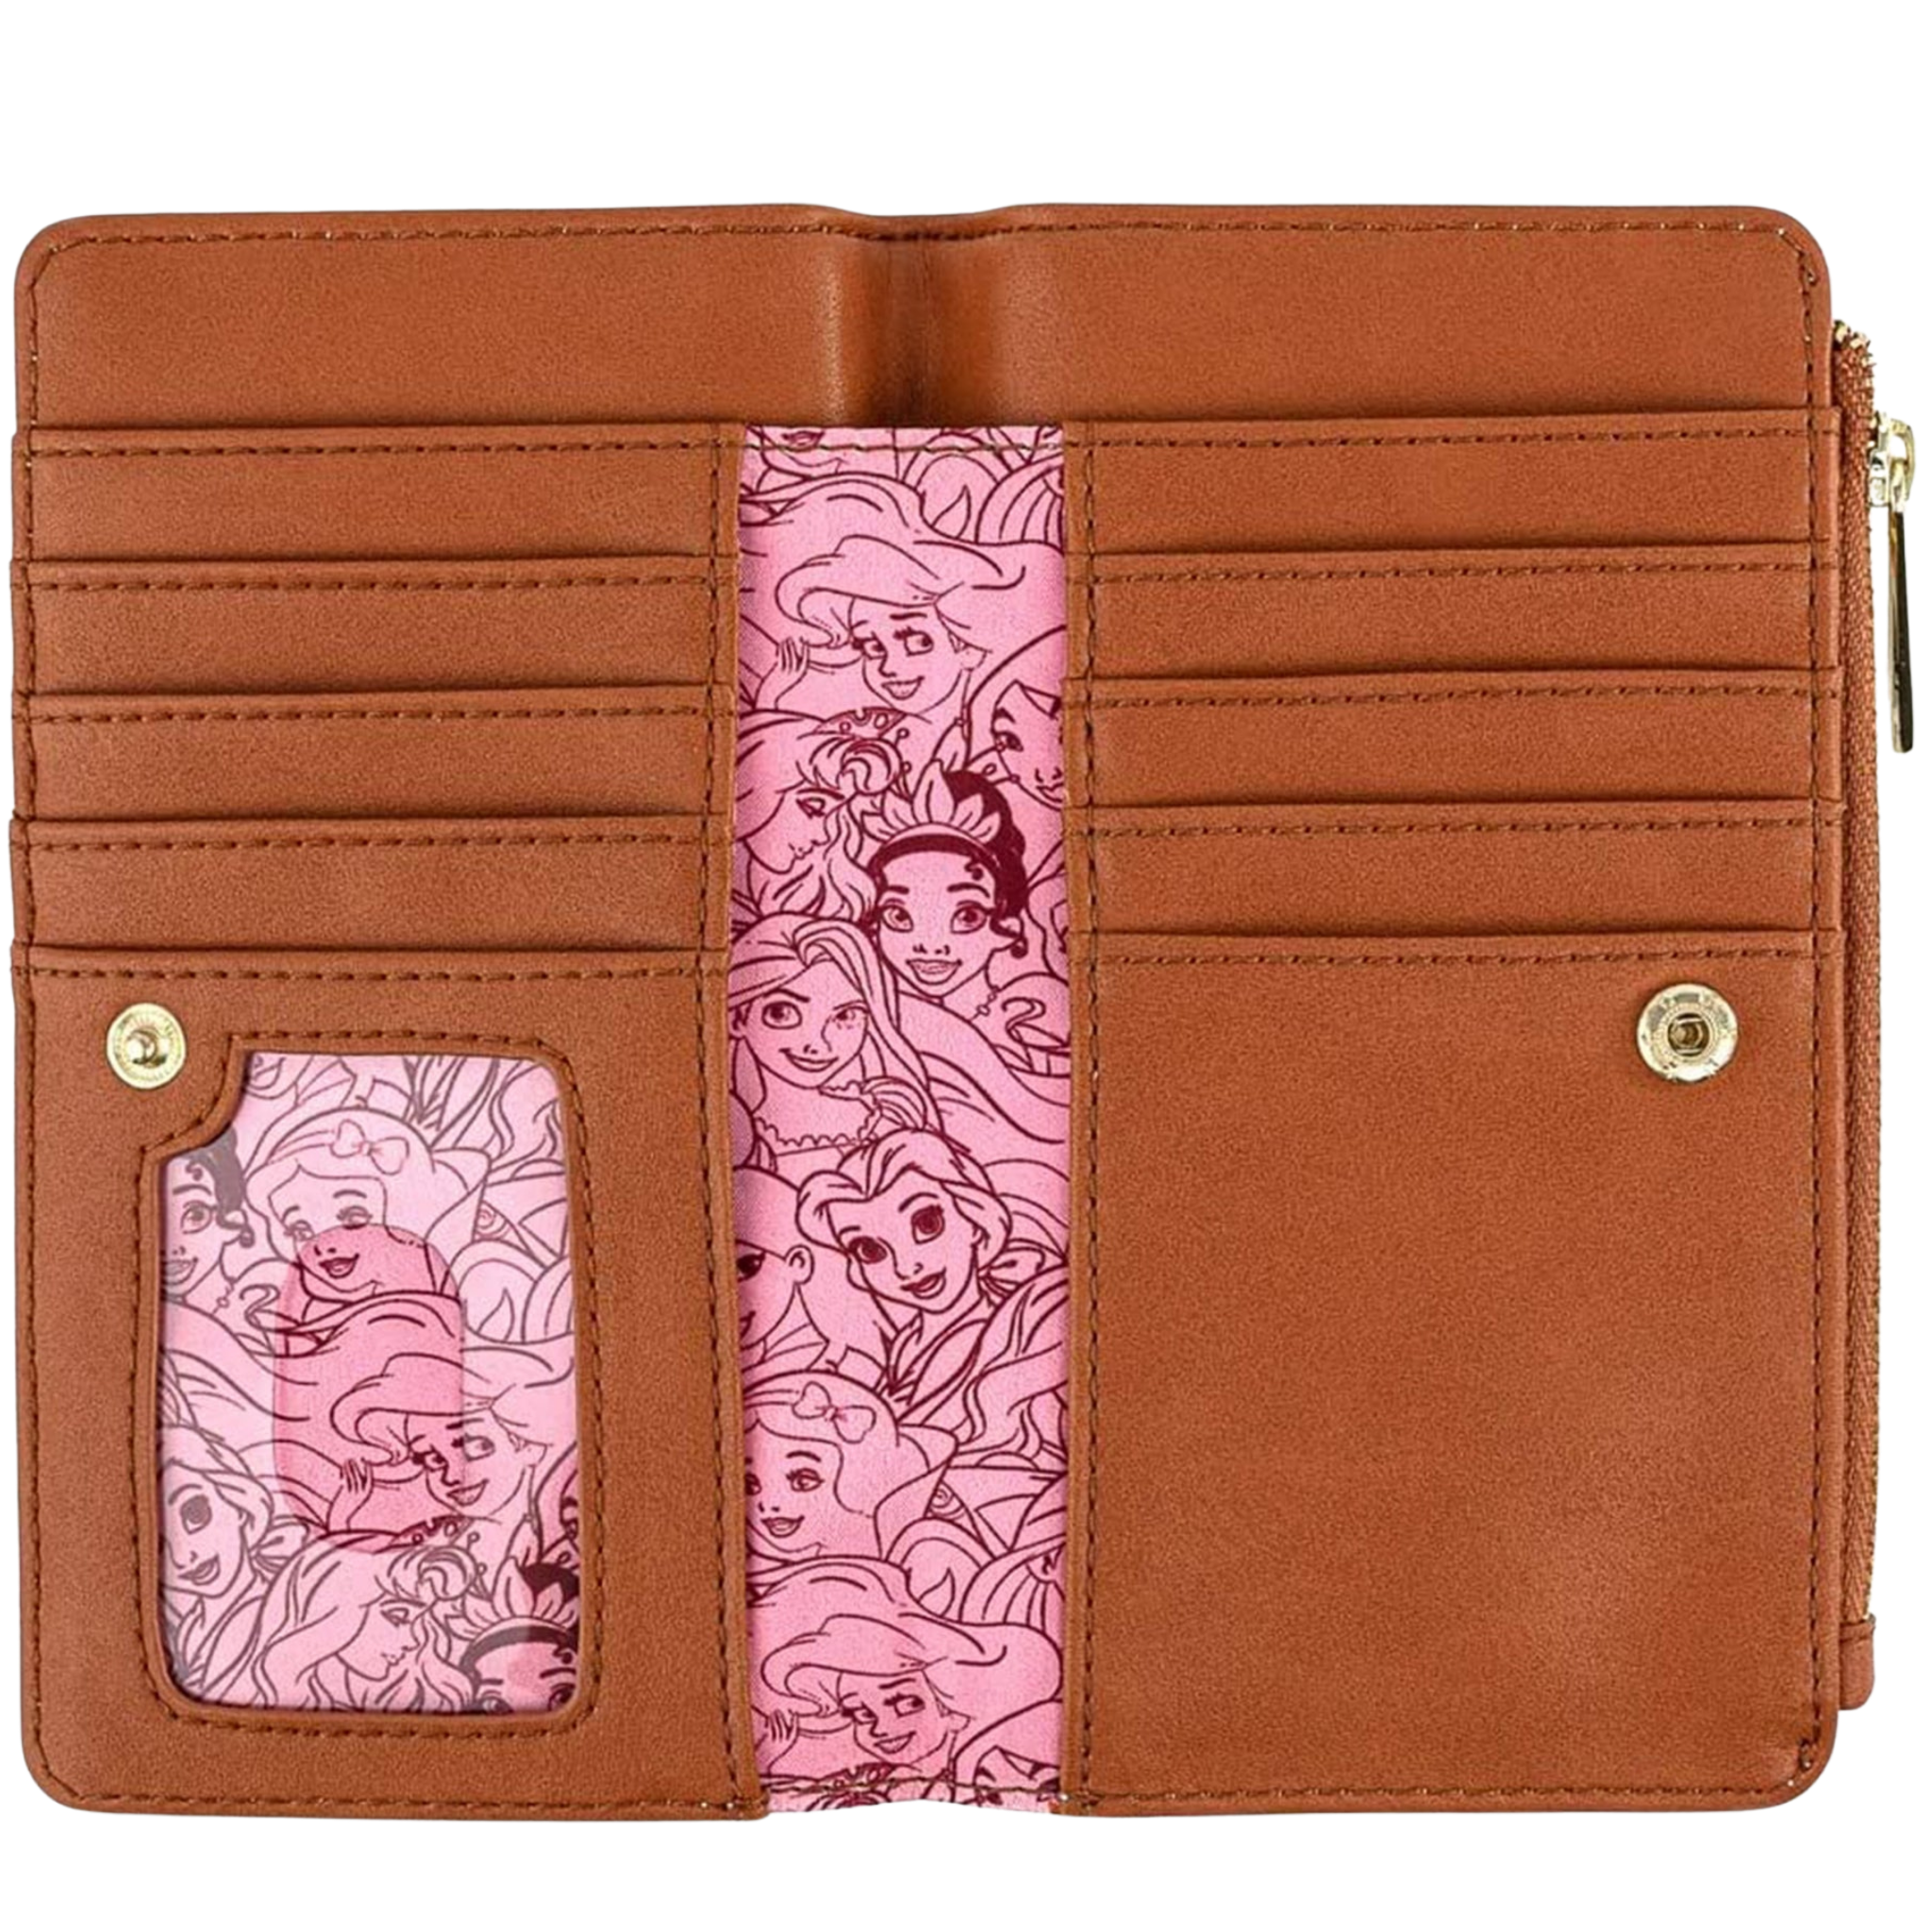 Loungefly Disney Princesses Floral Faux Leather Wallet